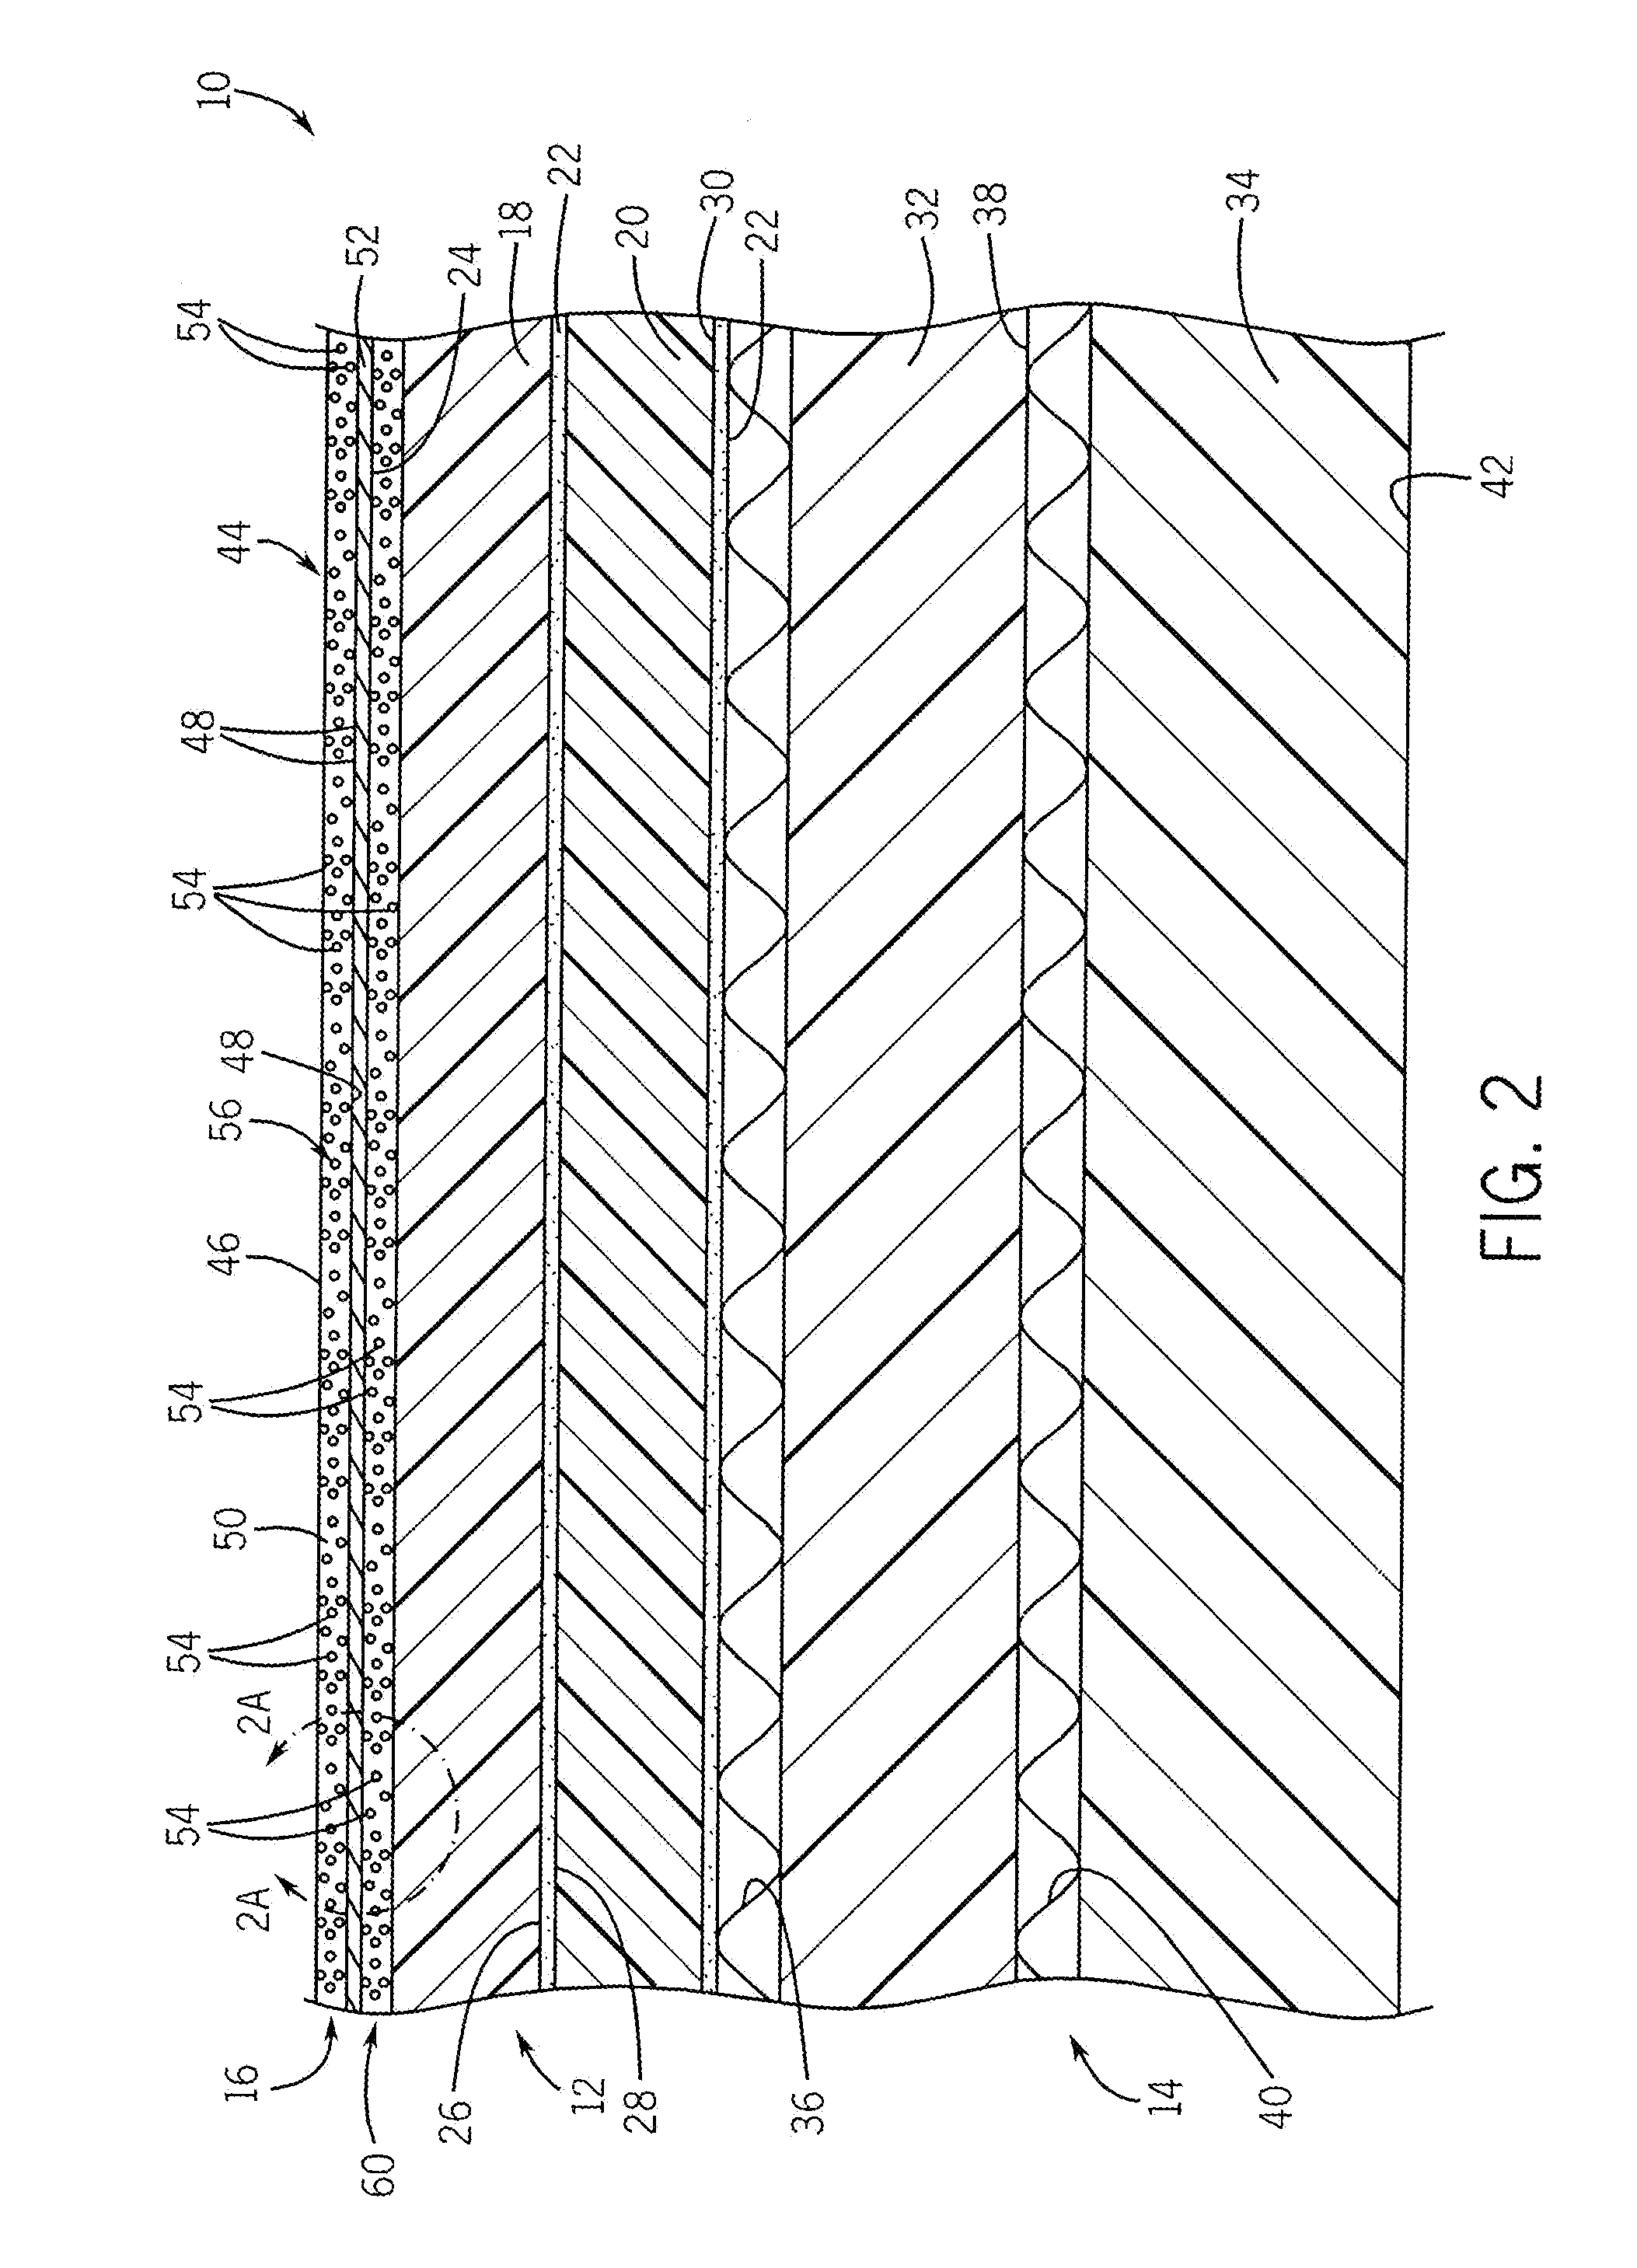 Body support cushion having multiple layers of phase change material